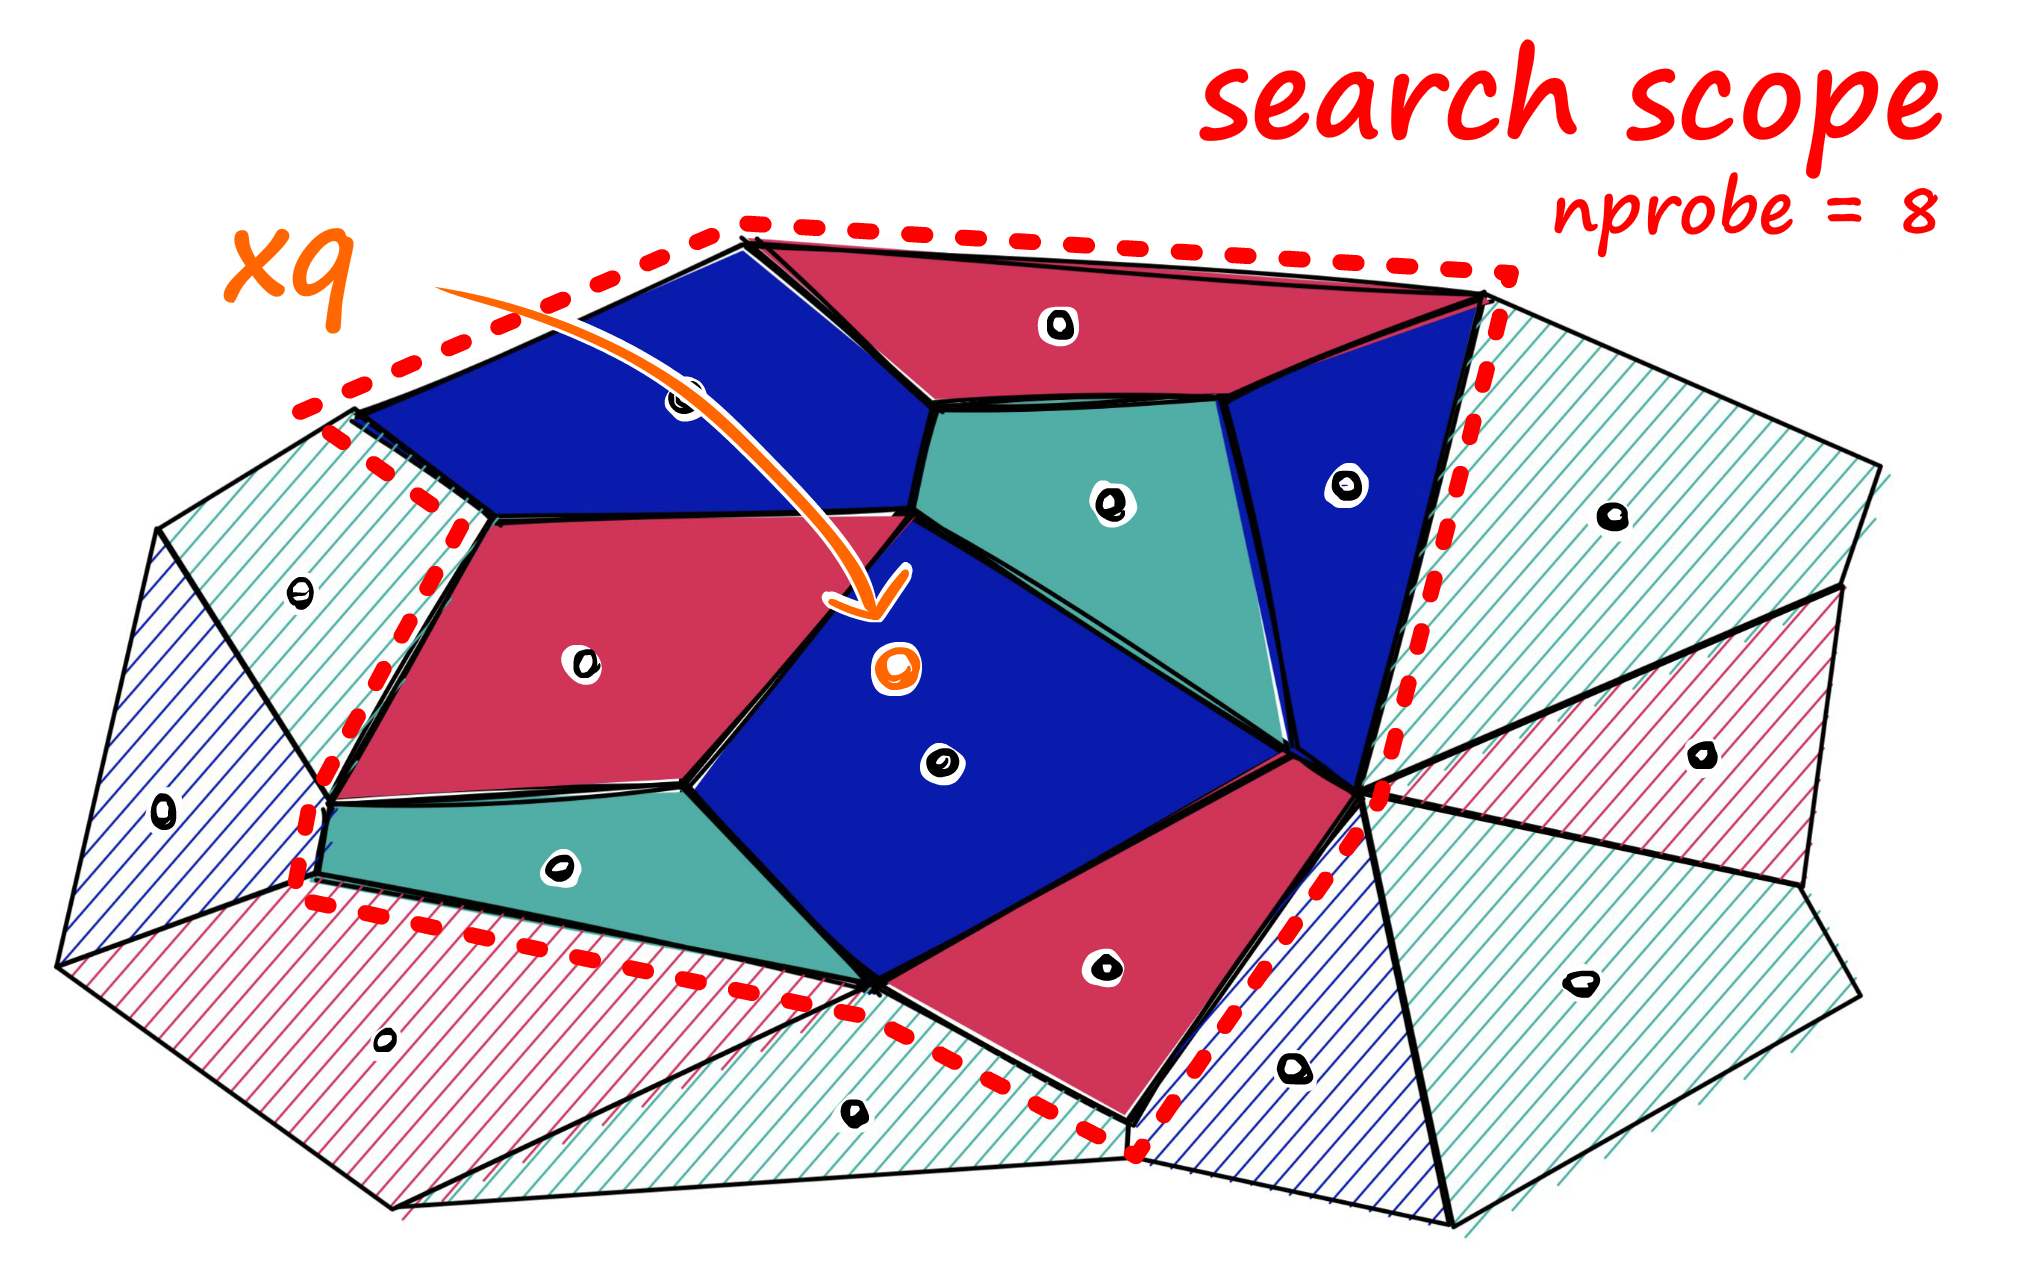 Increasing nprobe increases our search scope.